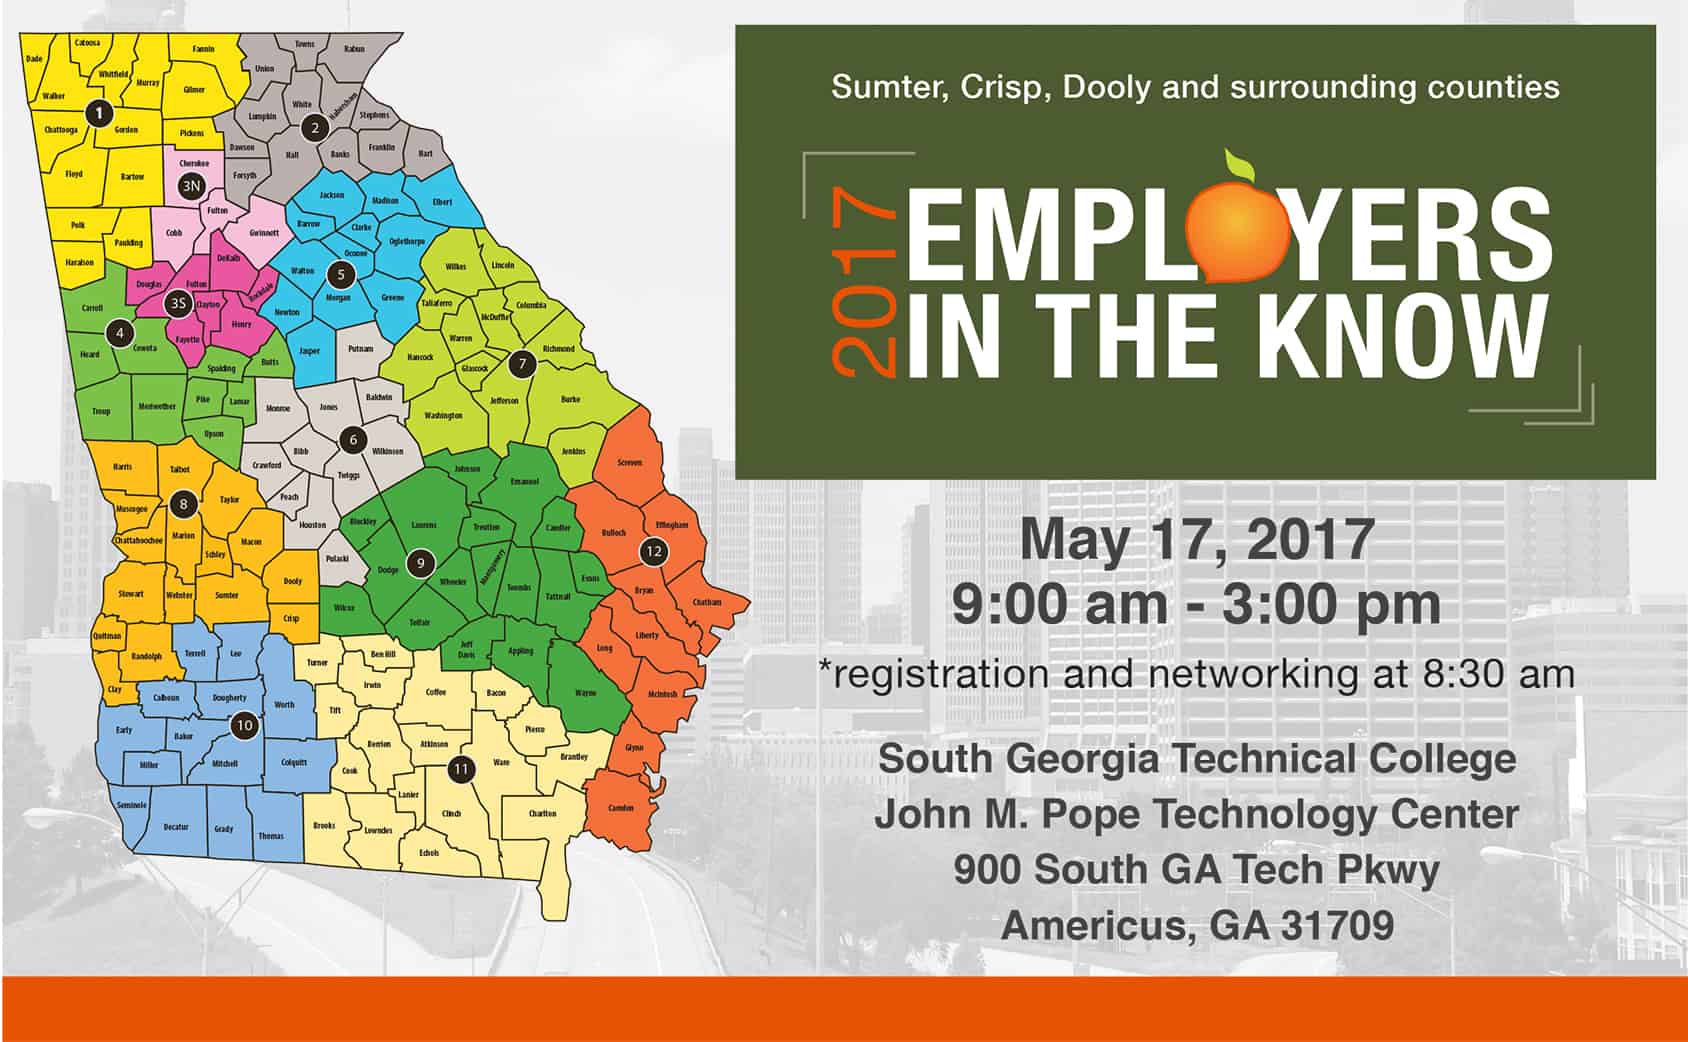 Georgia Labor Commissioner to speak at Employers in the Know summit at South Georgia Tech